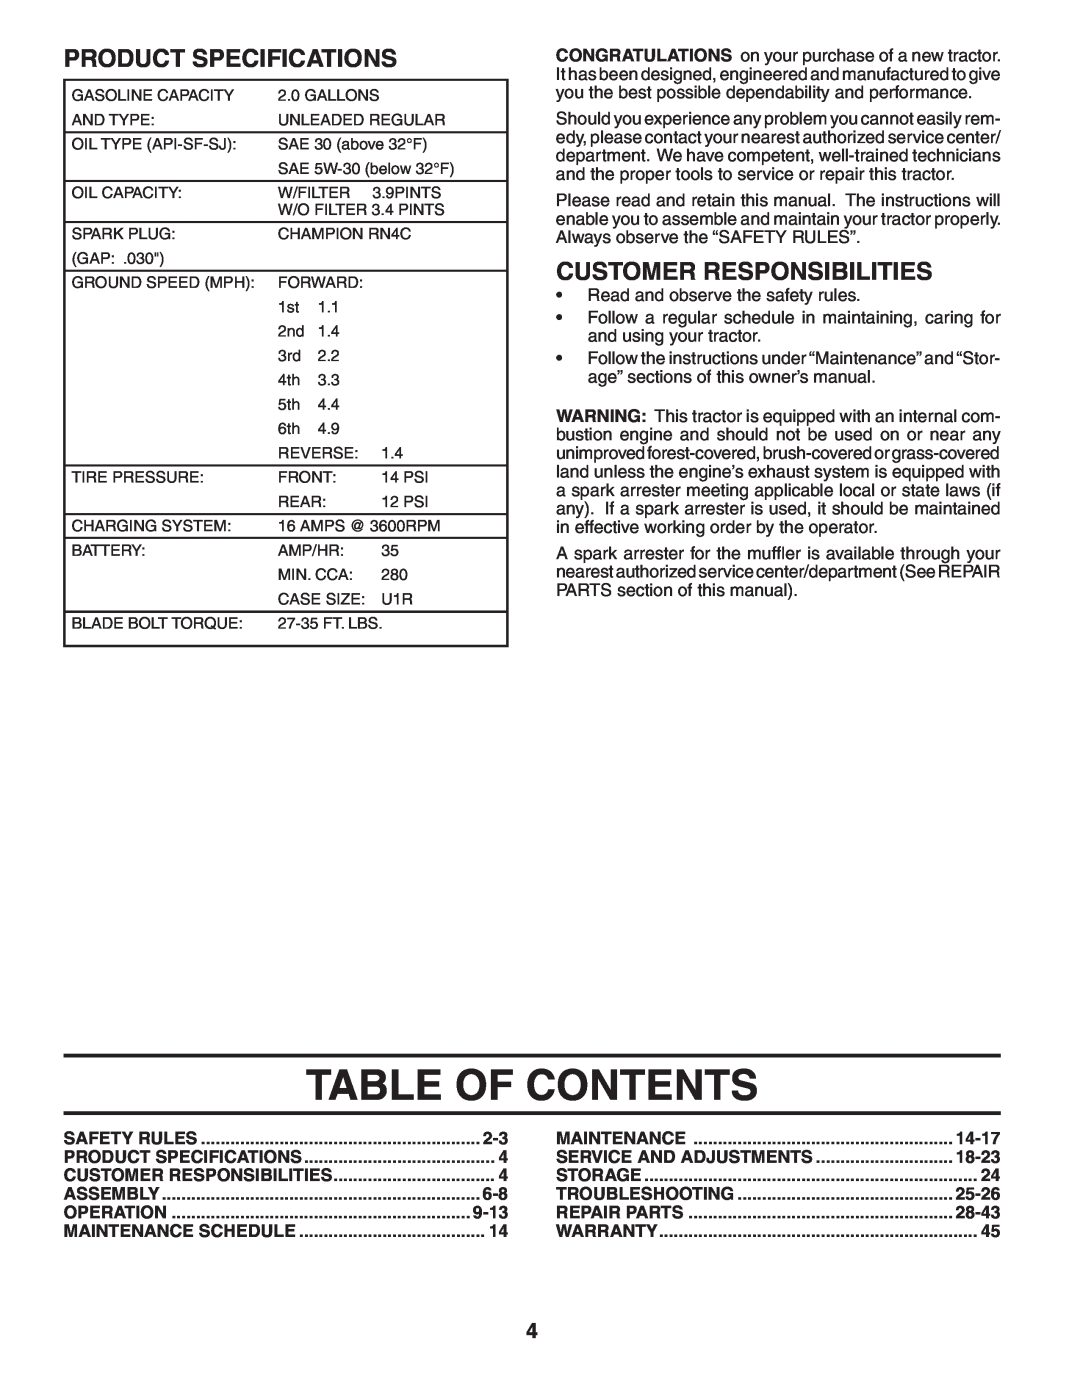 Weed Eater WET2242STD manual Table Of Contents, Product Specifications, Customer Responsibilities 